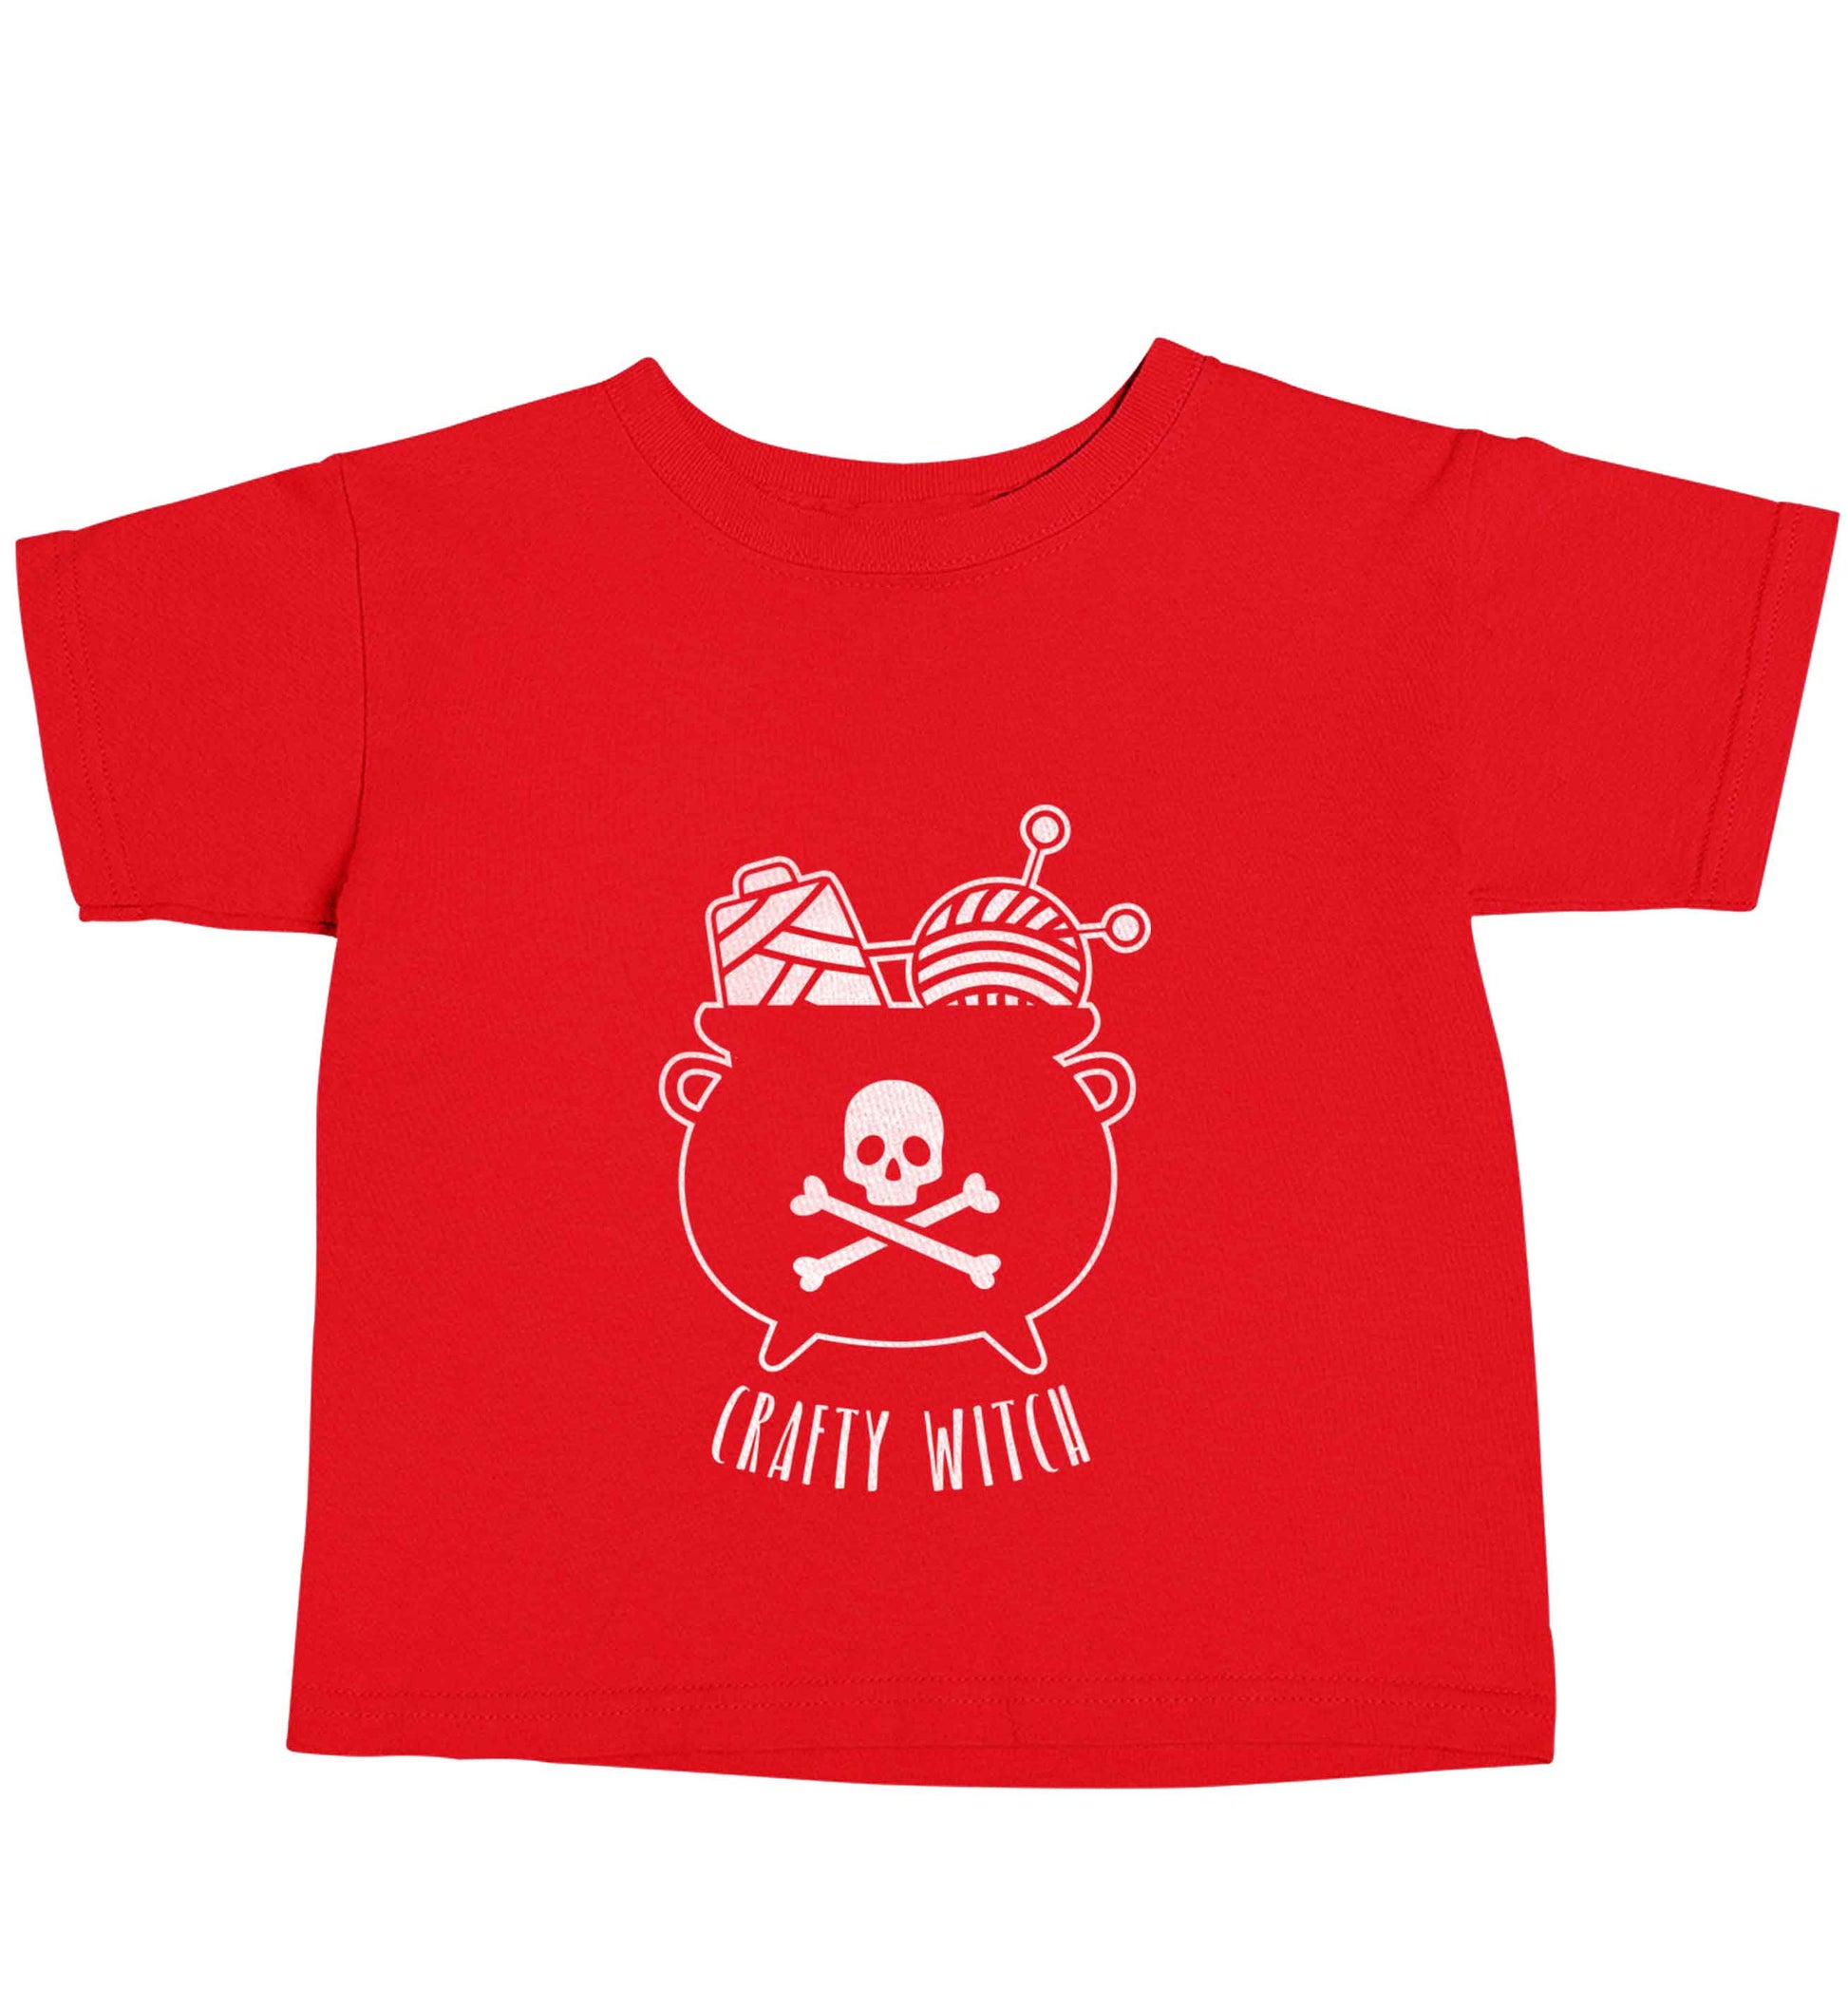 Crafty witch red baby toddler Tshirt 2 Years